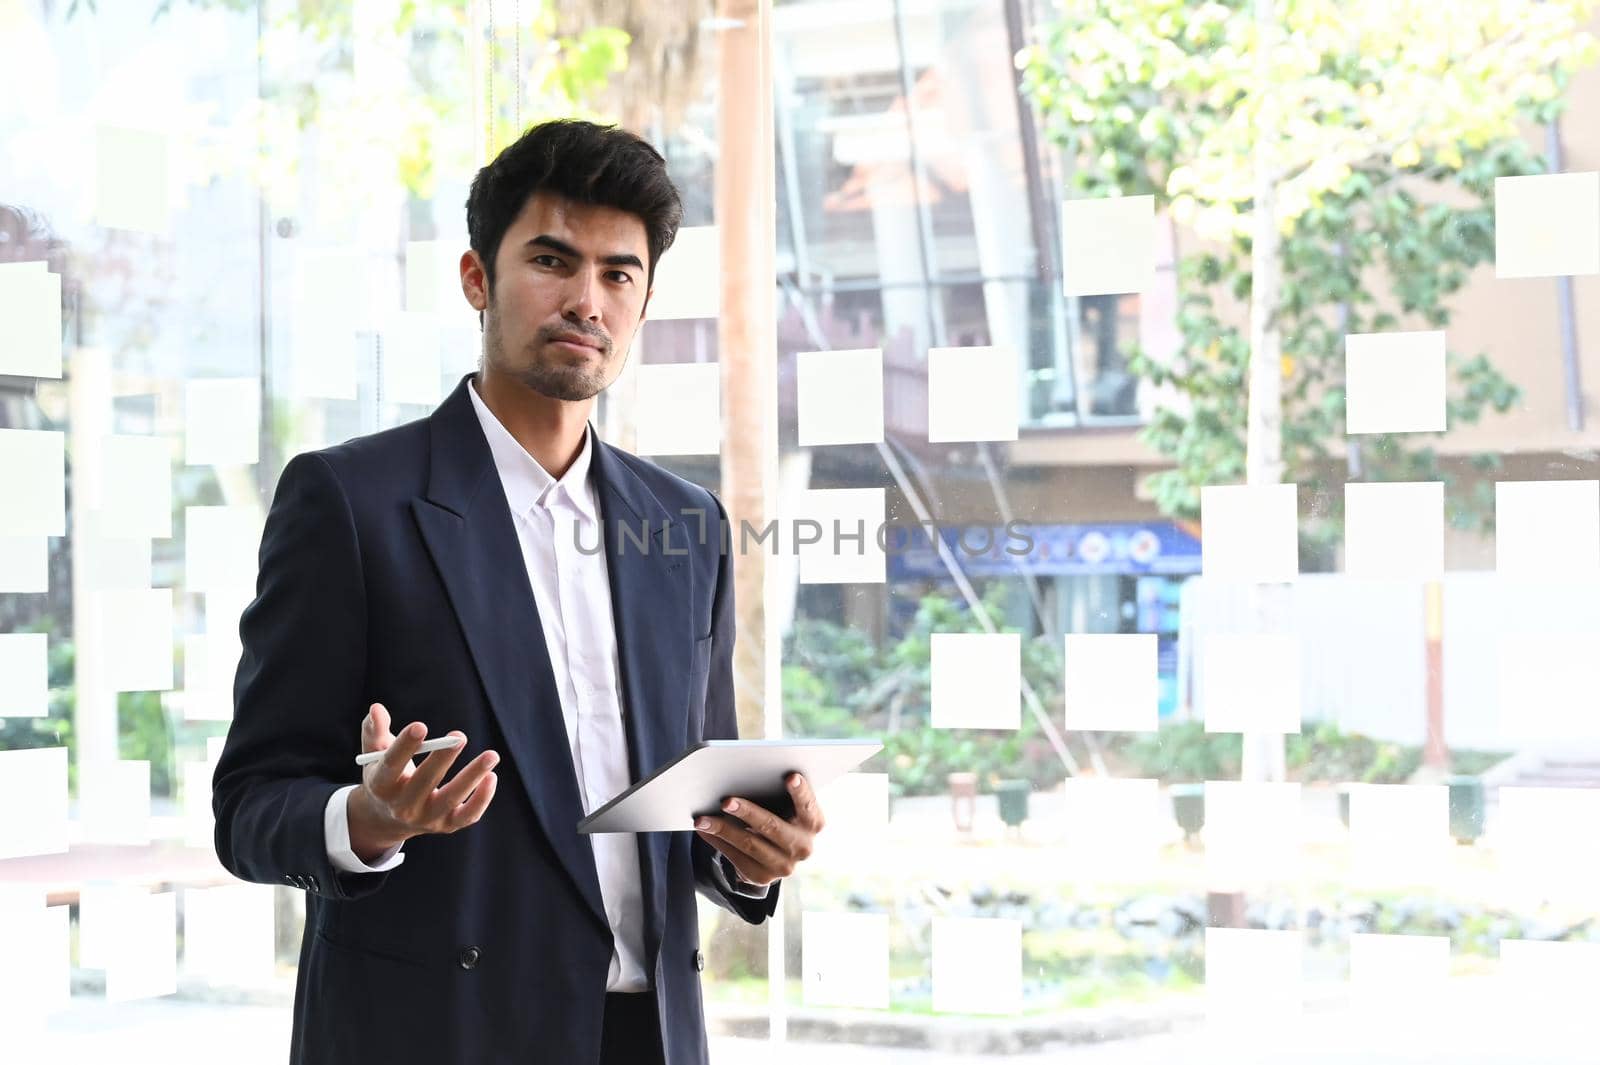 Confident professional businessman in black suit holding digital tablet and standing in bright modern office.